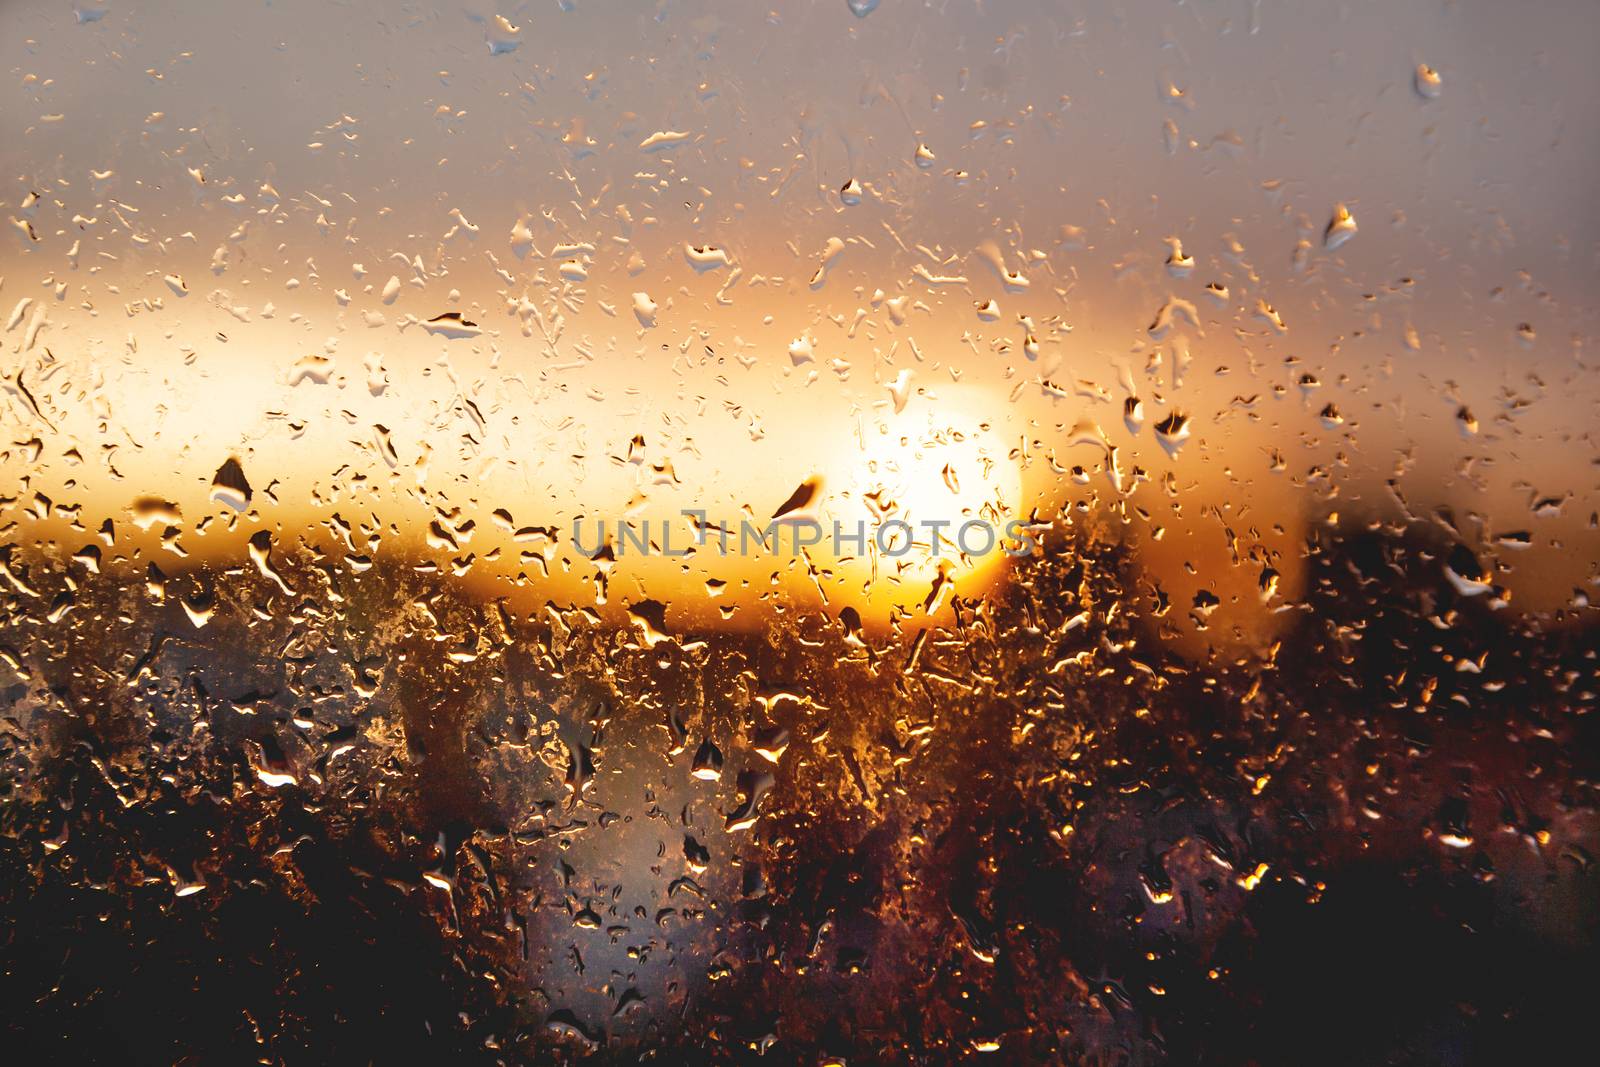 Sunset through window with raindrops after rain. Nature background with bright orange sun beams through wet glass. by aksenovko